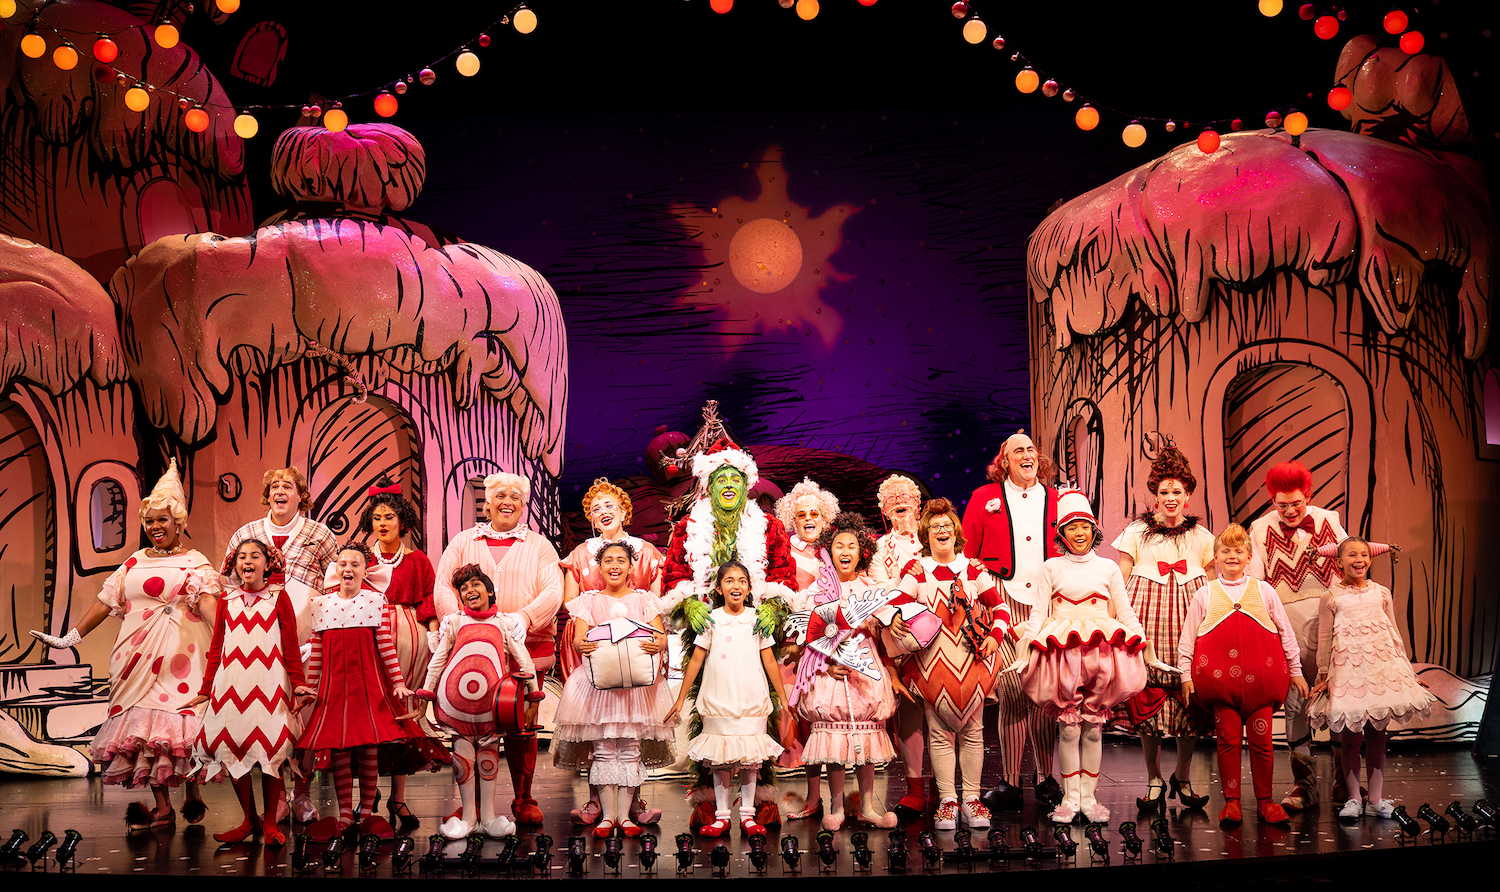 How the Grinch Stole Christmas theatre play at the Old Globe theatre in San Diego